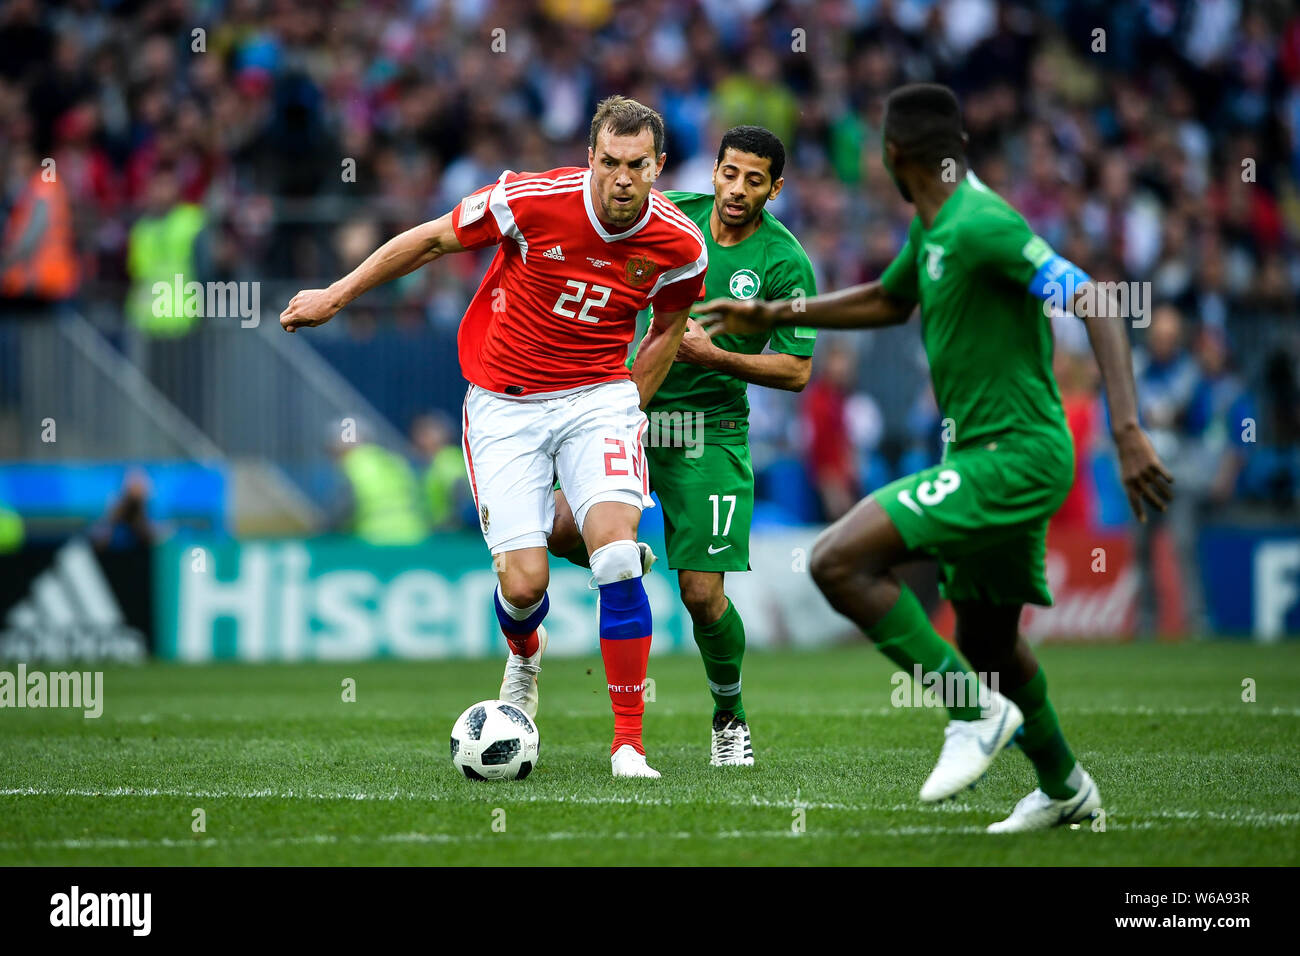 Daler Kuzyayev of Russia, left, challenges Taisir Al-Jassim of Saudi Arabia in their Group A match during the 2018 FIFA World Cup in Moscow, Russia, 1 Stock Photo